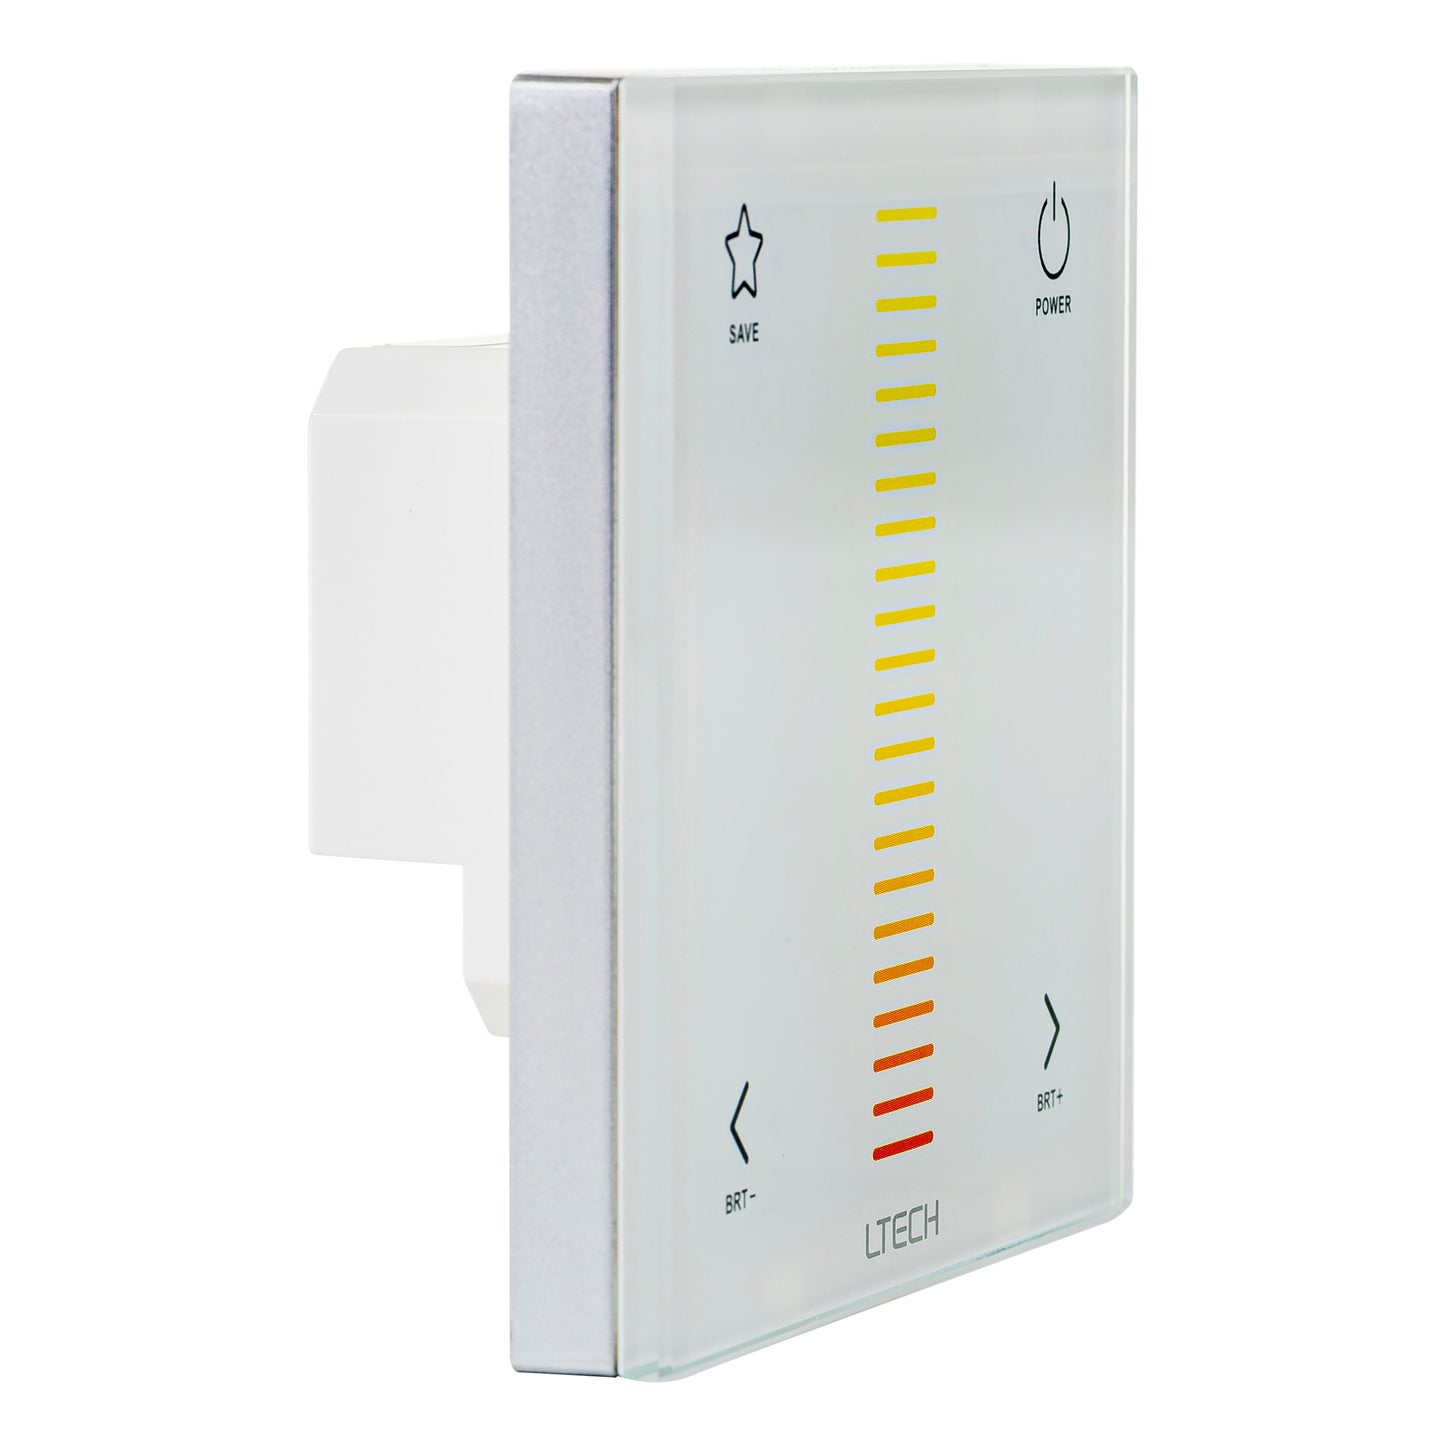 Ct Touch Panel Dimming Controller 